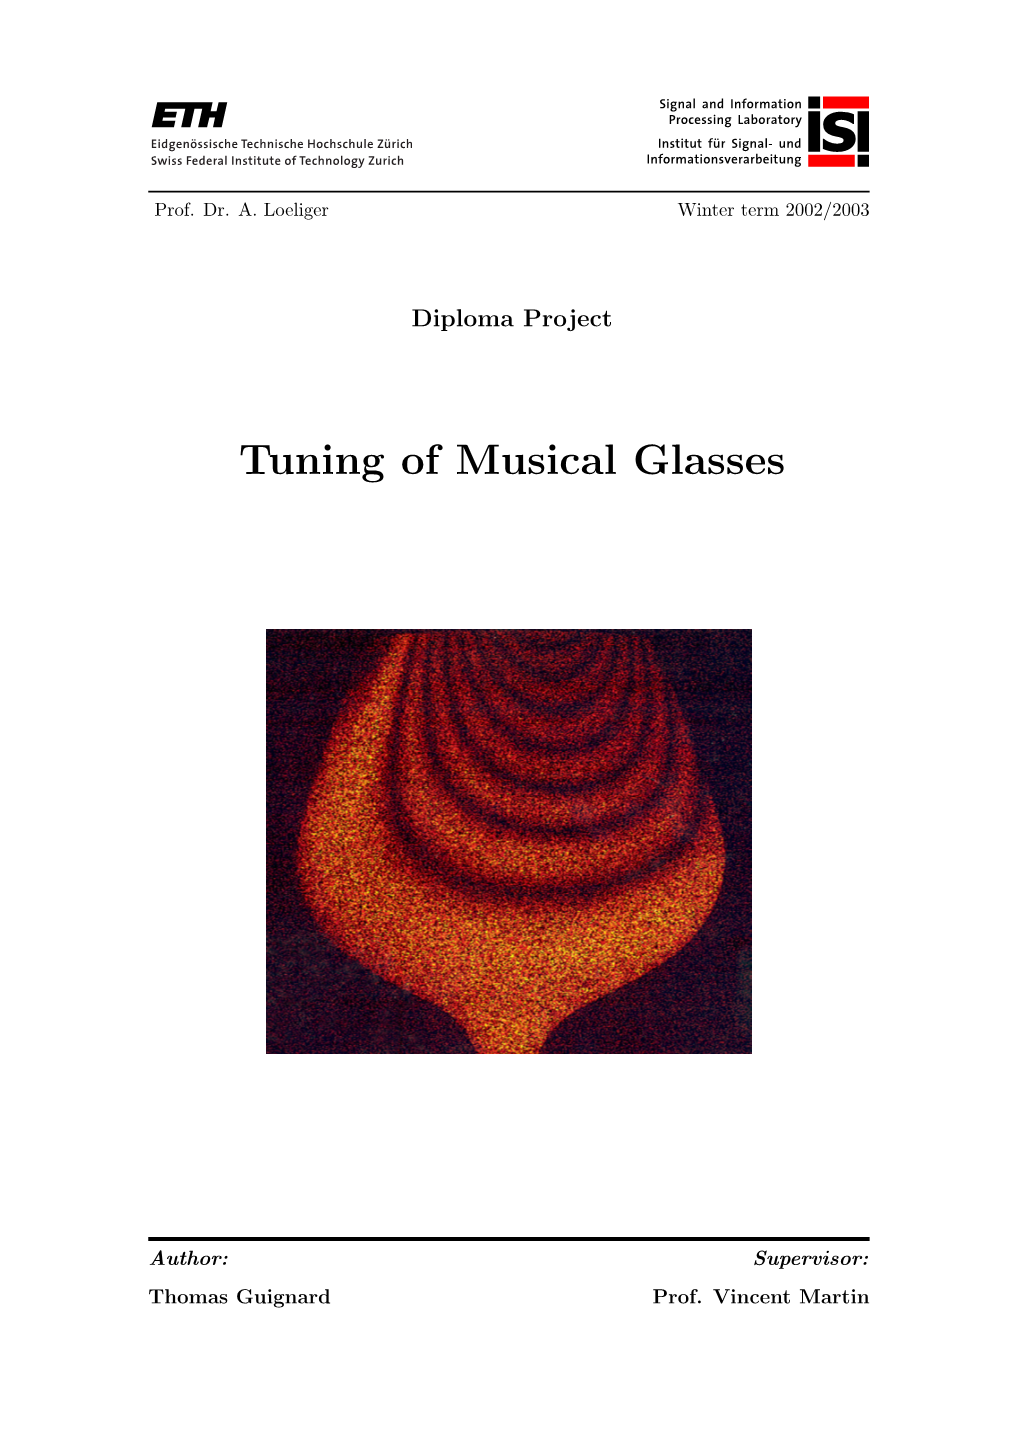 Tuning of Musical Glasses